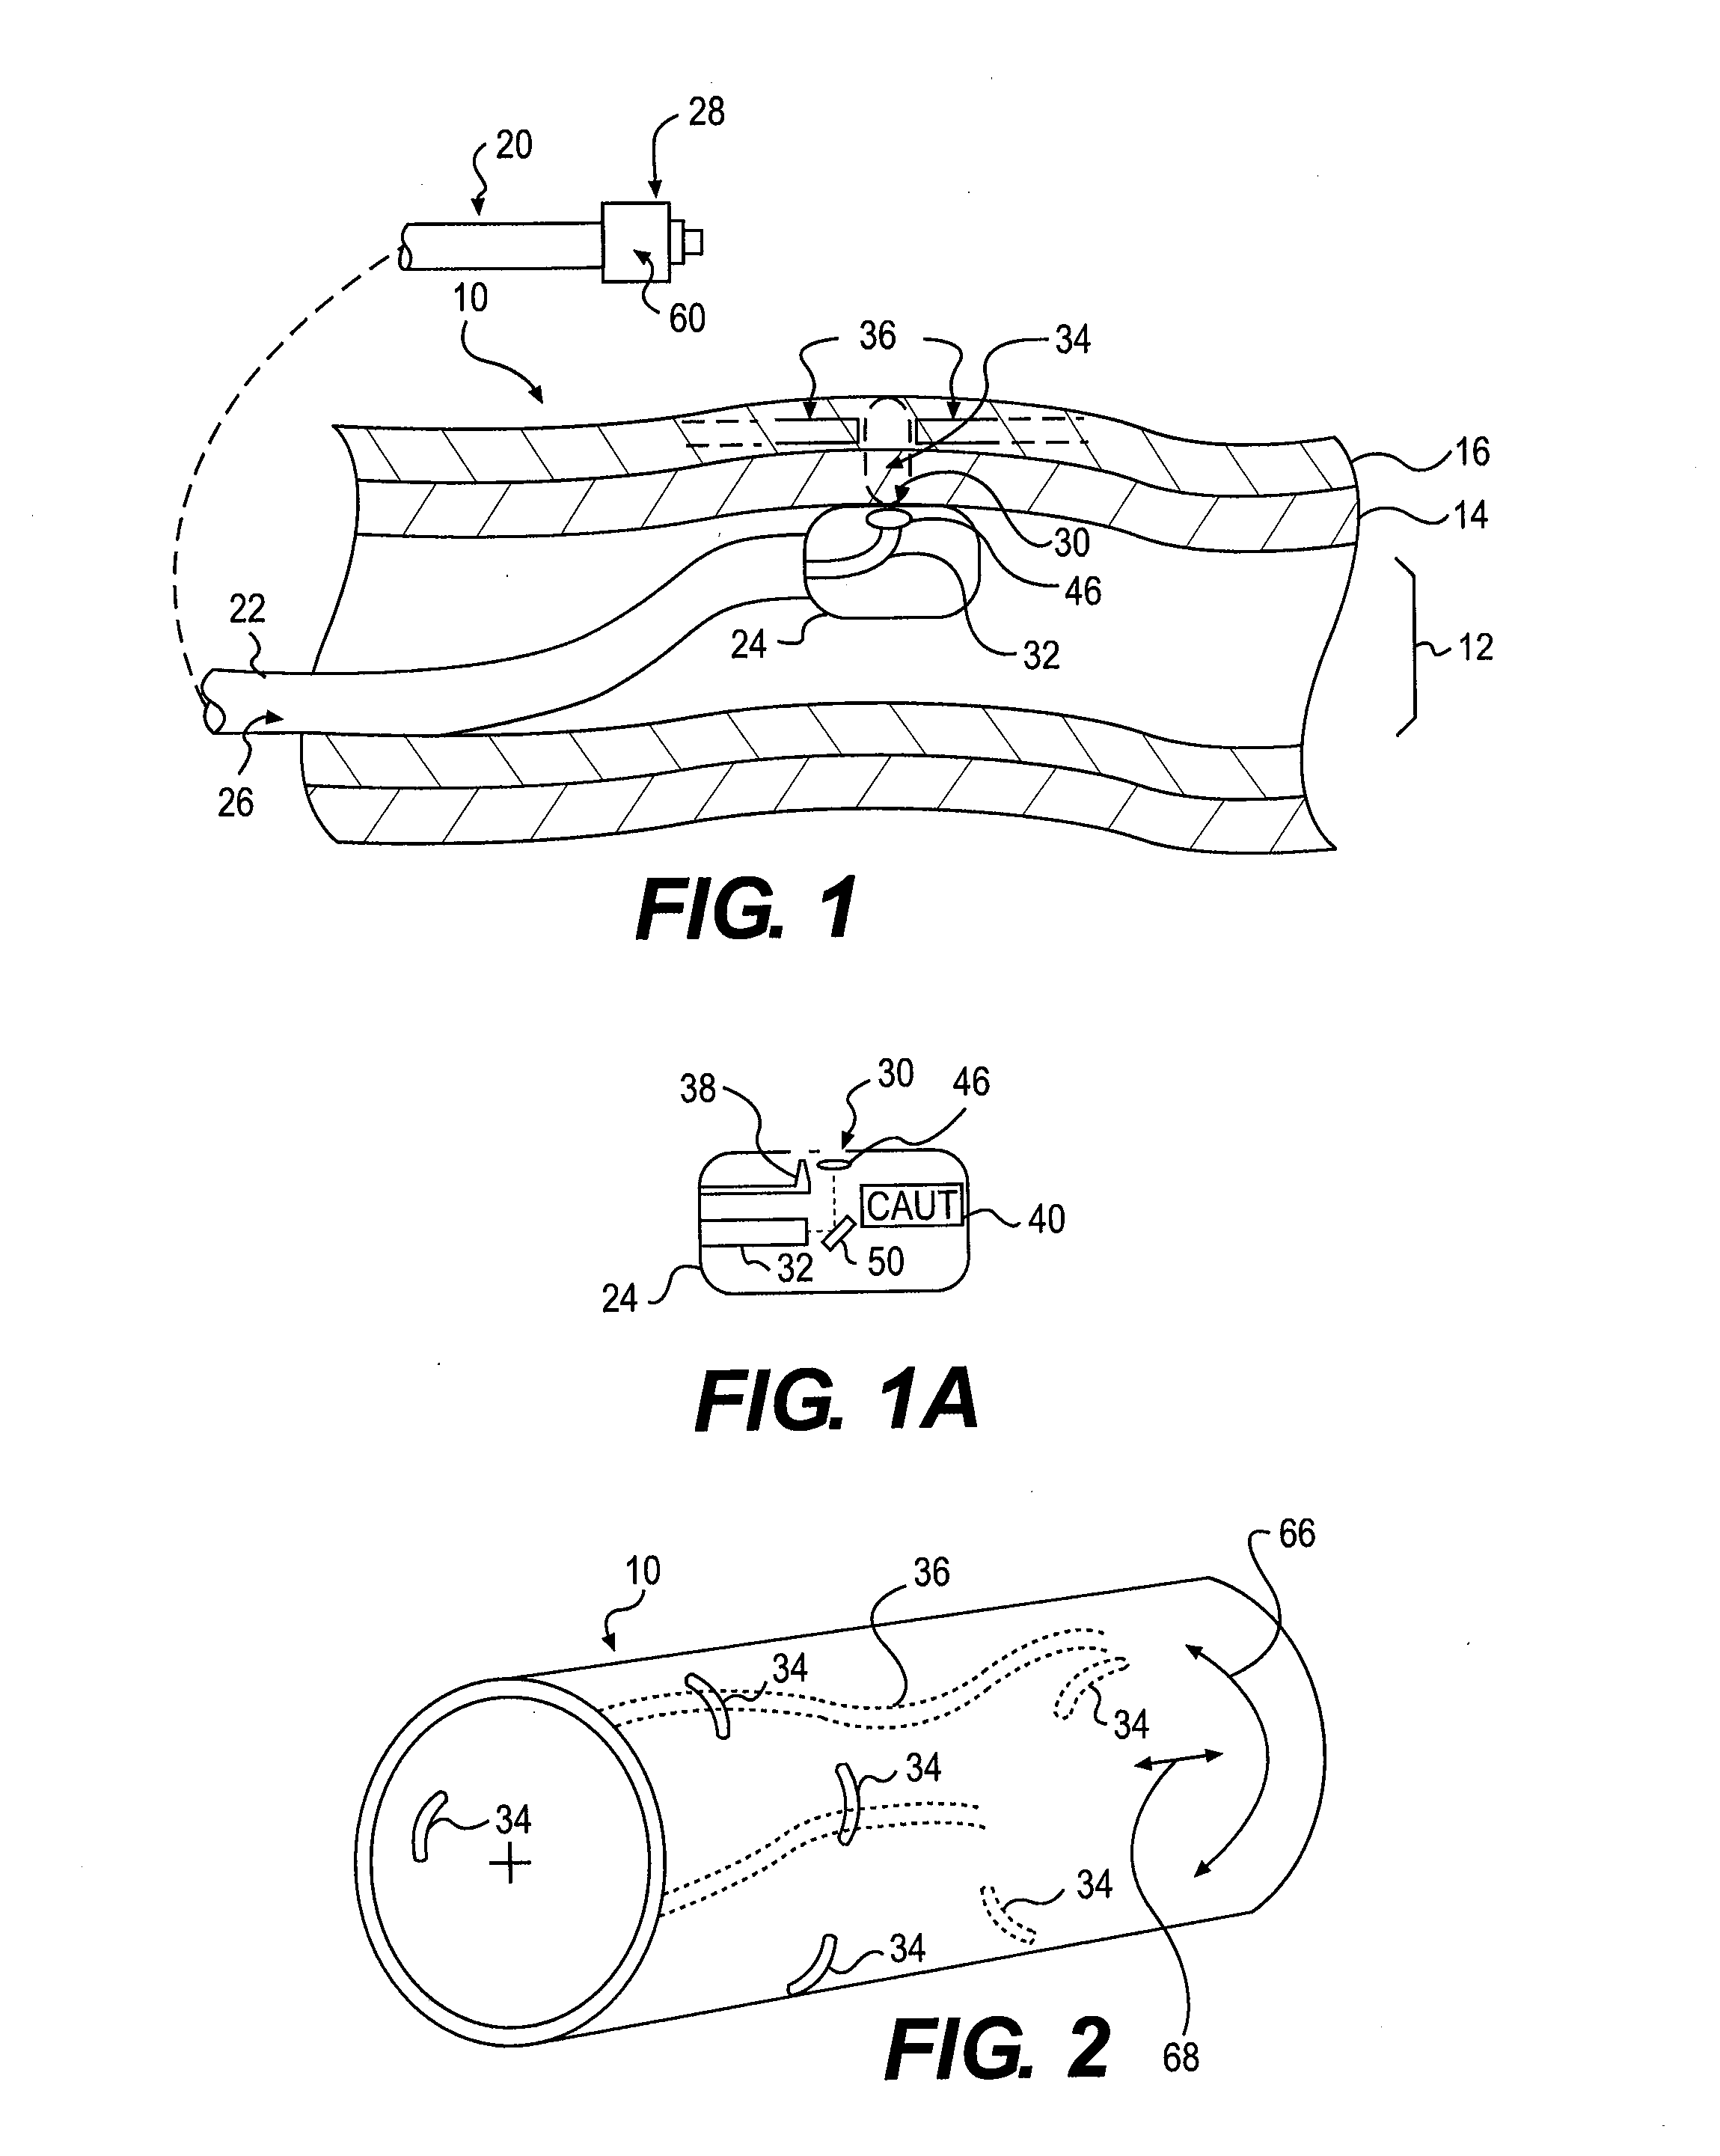 Catheter device and method for denervation